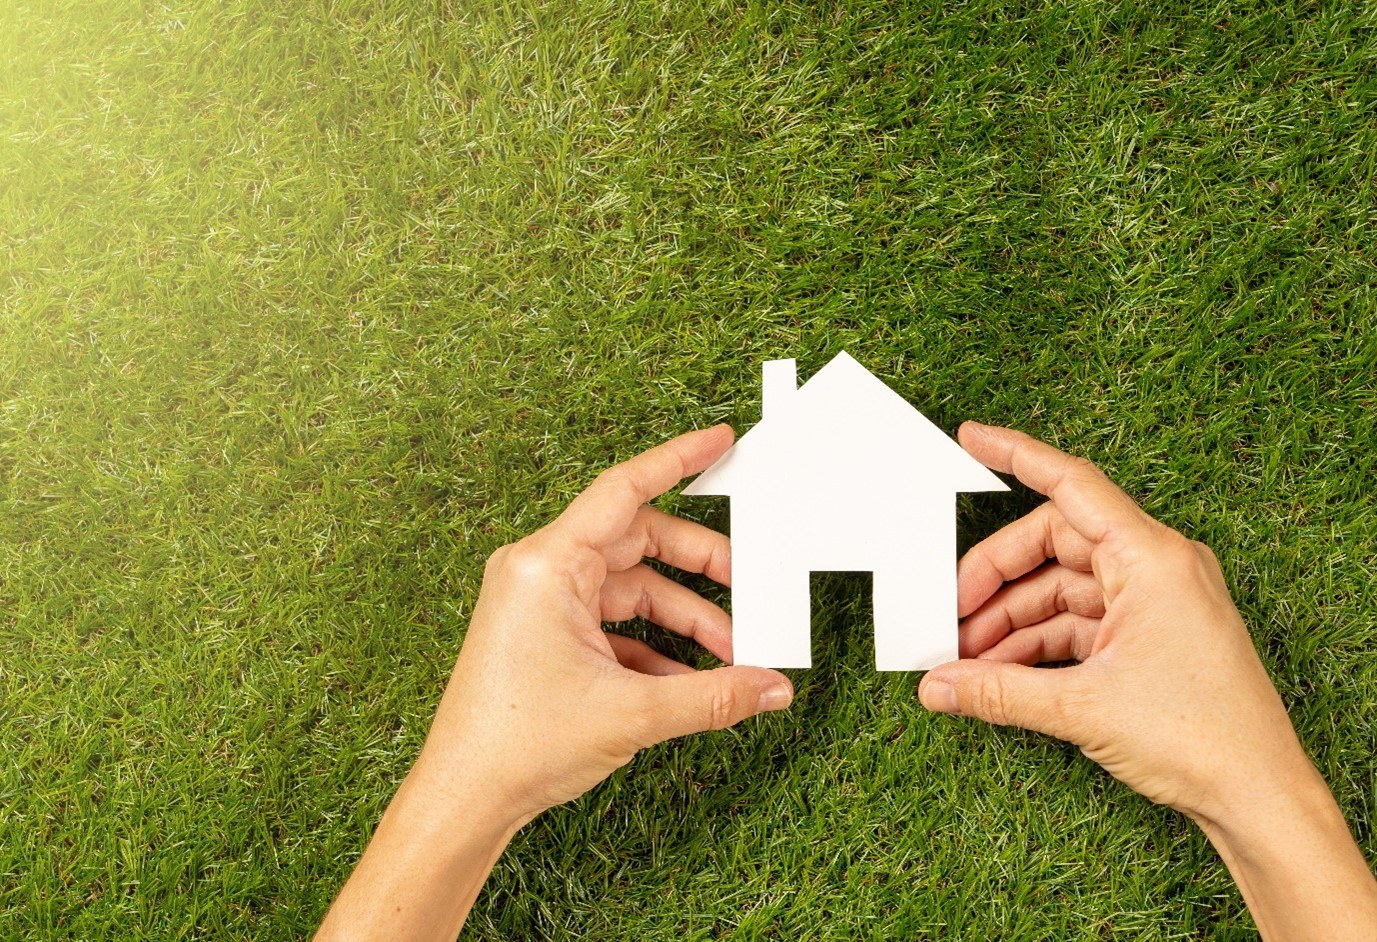 Are you wanting to be a greener landlord?